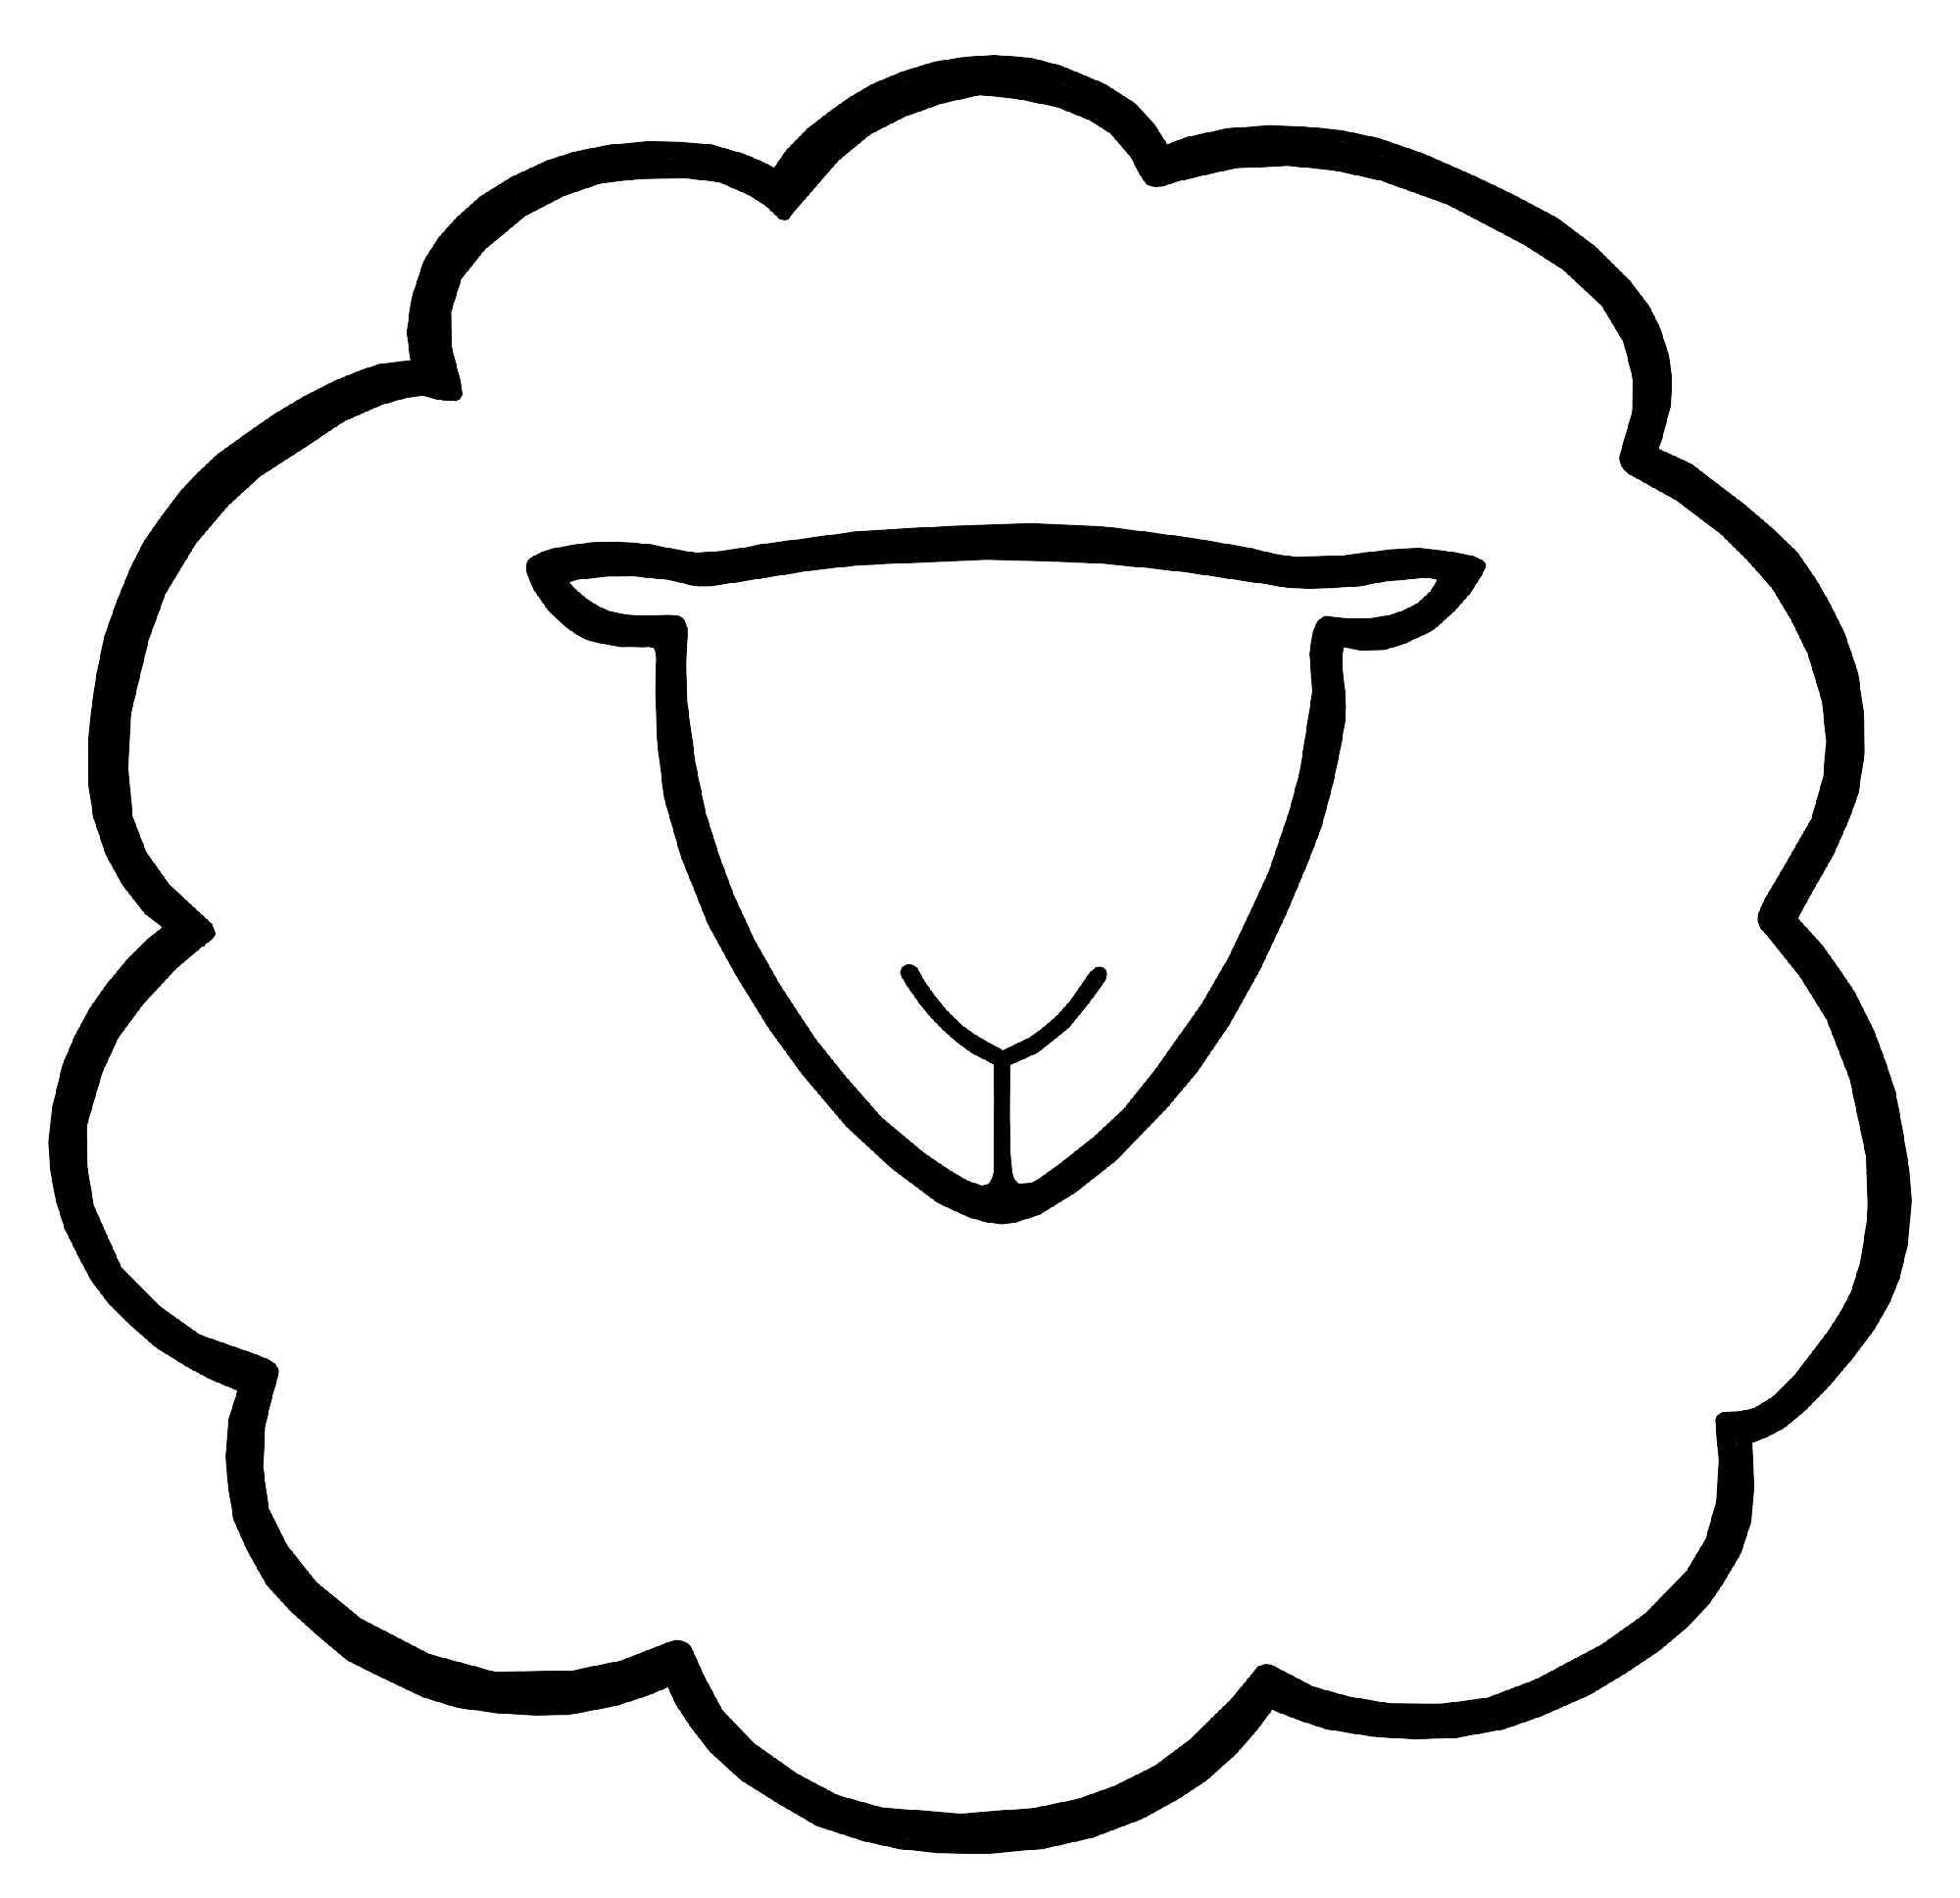 image of a little white sheep with a white head